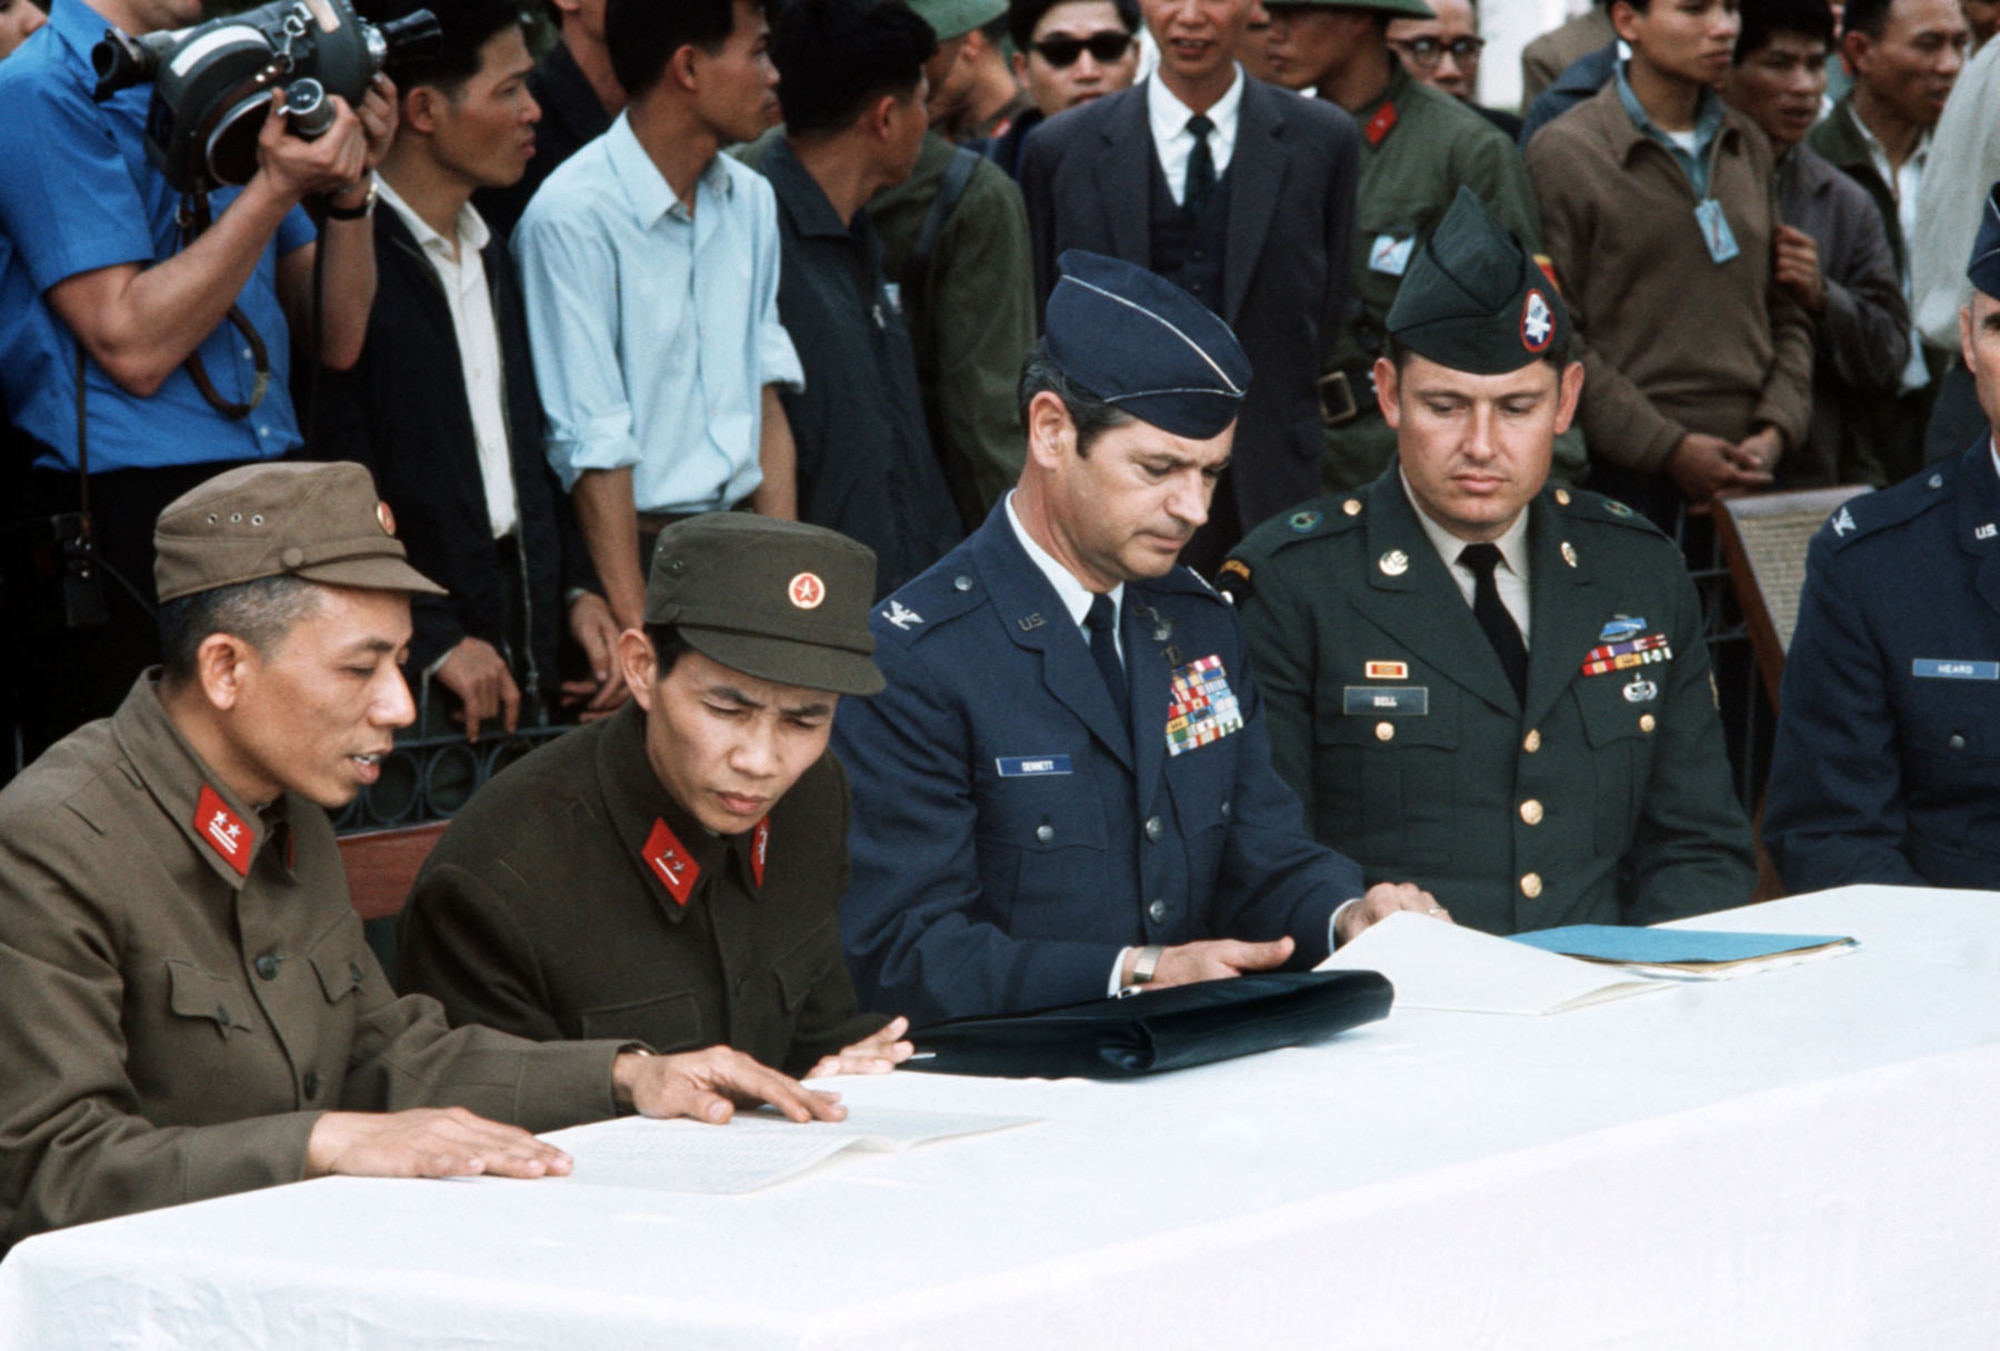 The processing delegation in Hanoi included military representatives from the U.S. and North Vietnam. (U.S. Air Force photo)